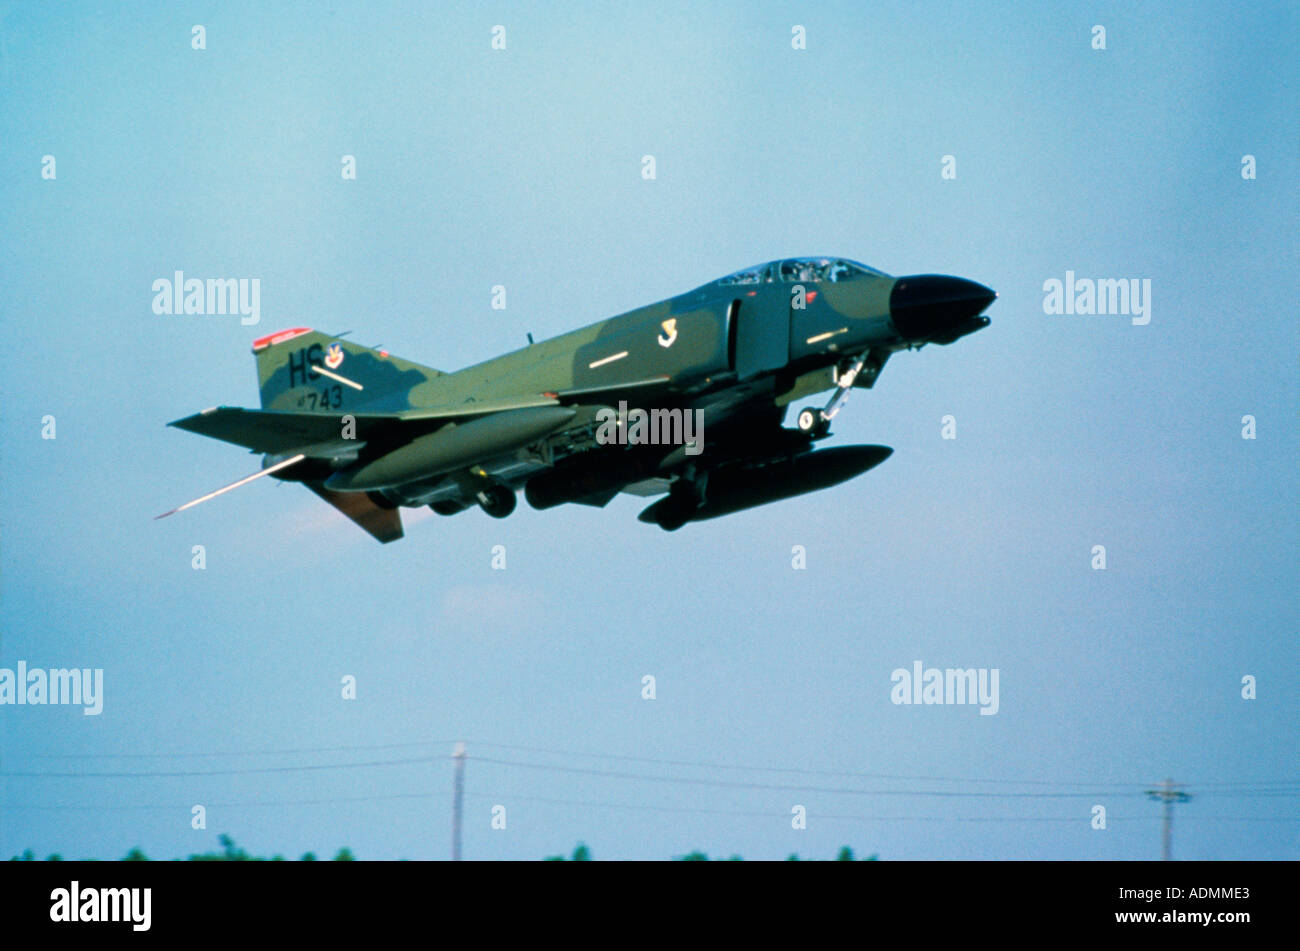 Low angle view of an F-4G Phantom II fighter plane in flight Stock Photo